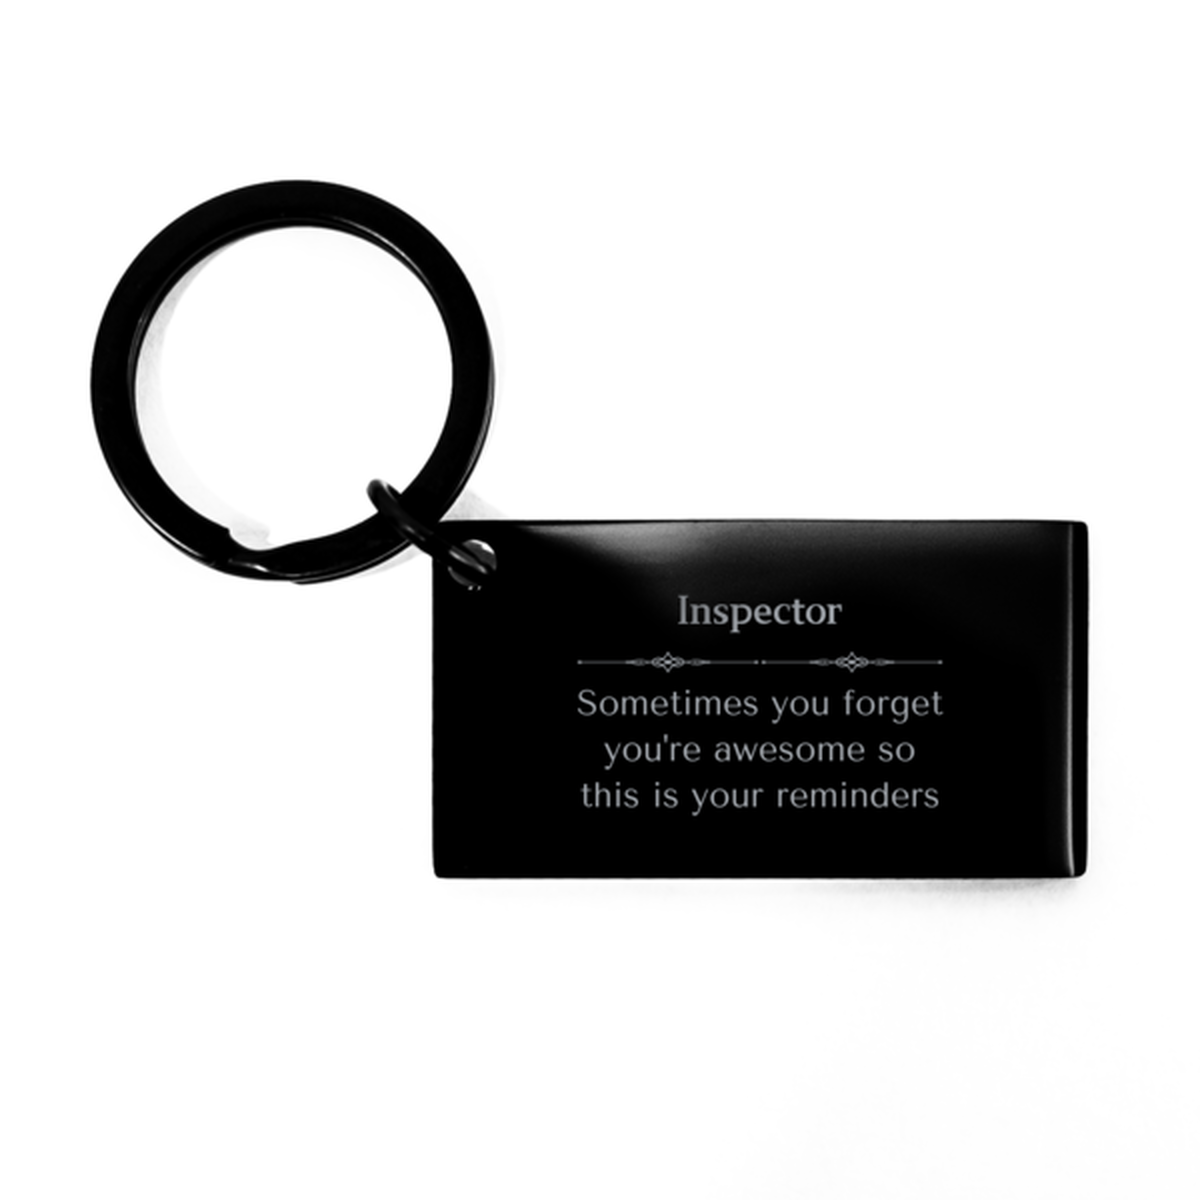 Sentimental Inspector Keychain, Millwright Sometimes you forget you're awesome so this is your reminders, Graduation Christmas Birthday Gifts for Inspector, Men, Women, Coworkers